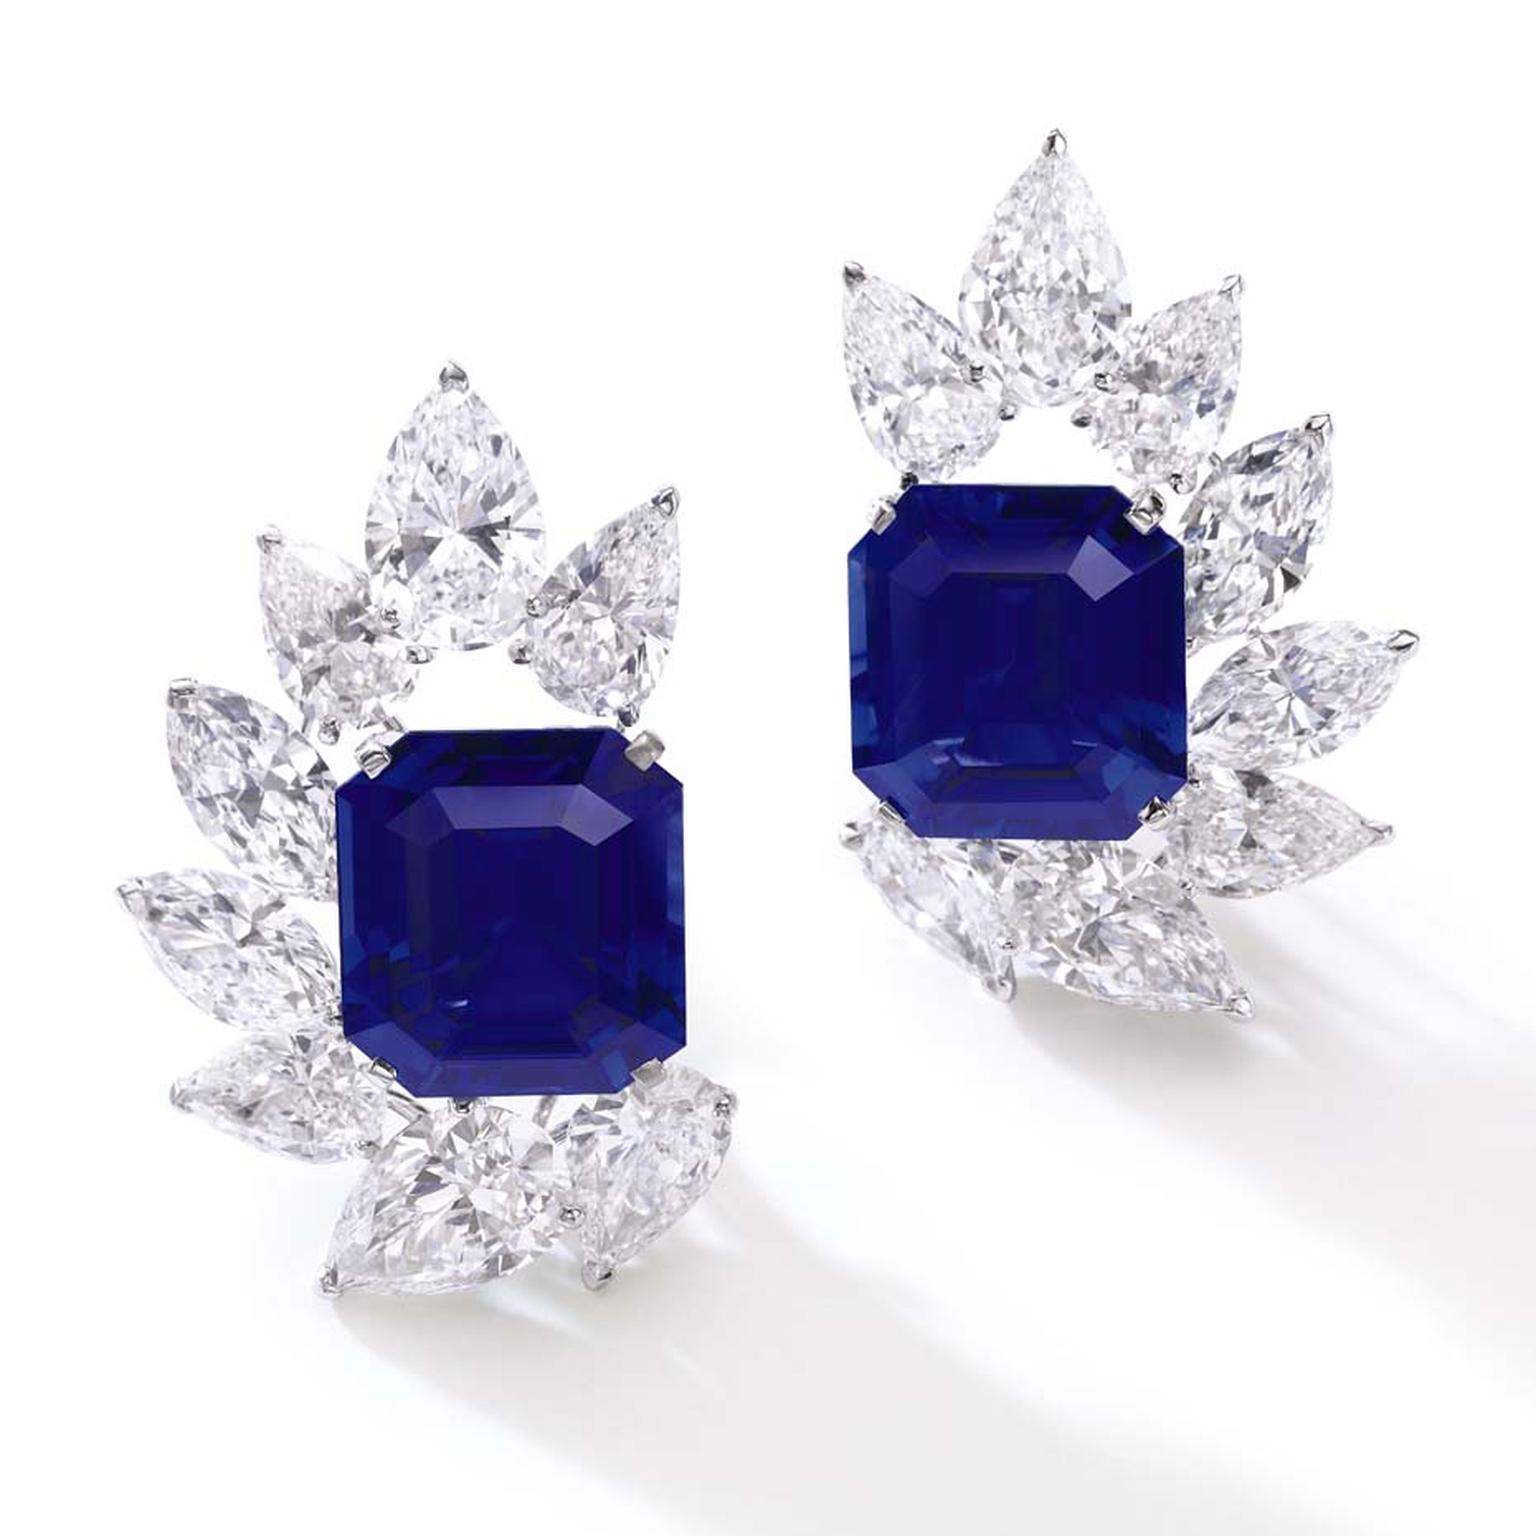 This pair of Burmese sapphire and diamond ear clips sold for $3.42 million at Sotheby’s Geneva Magnificent Jewels and Noble Jewels spring sale, setting a new world record for a pair of Burmese sapphire earrings.